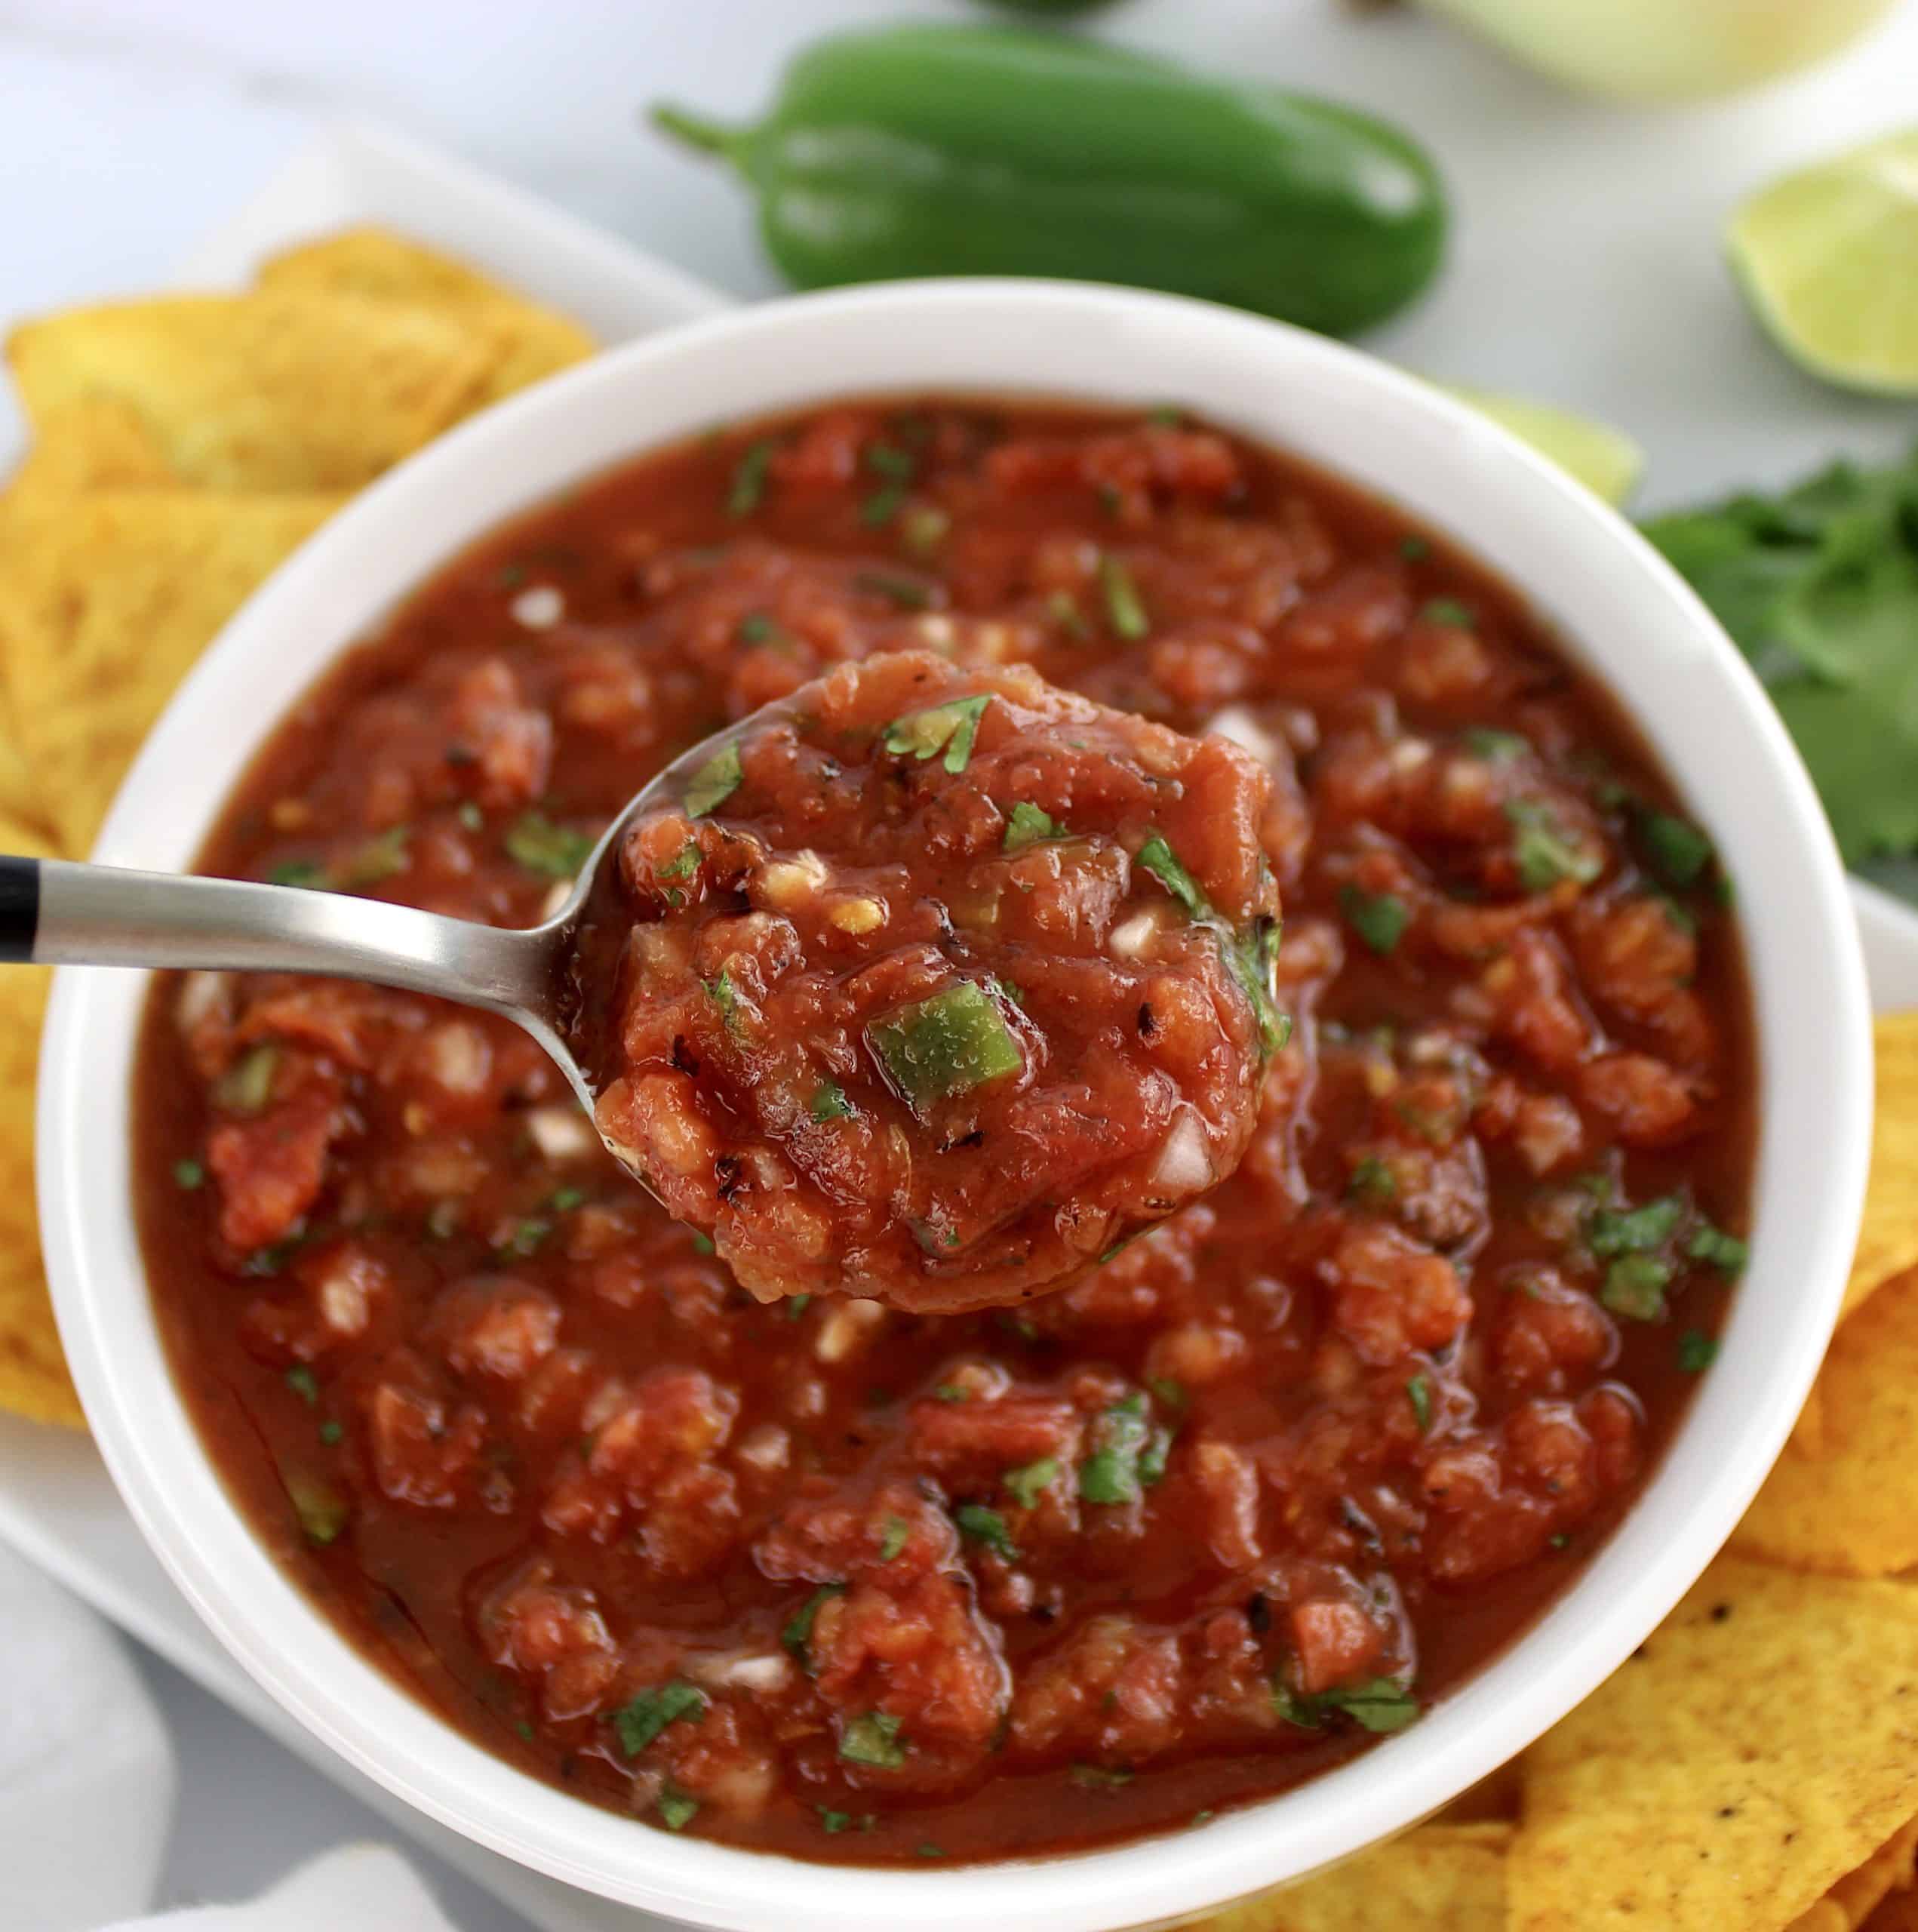 salsa in white bowl with spoon holding up some